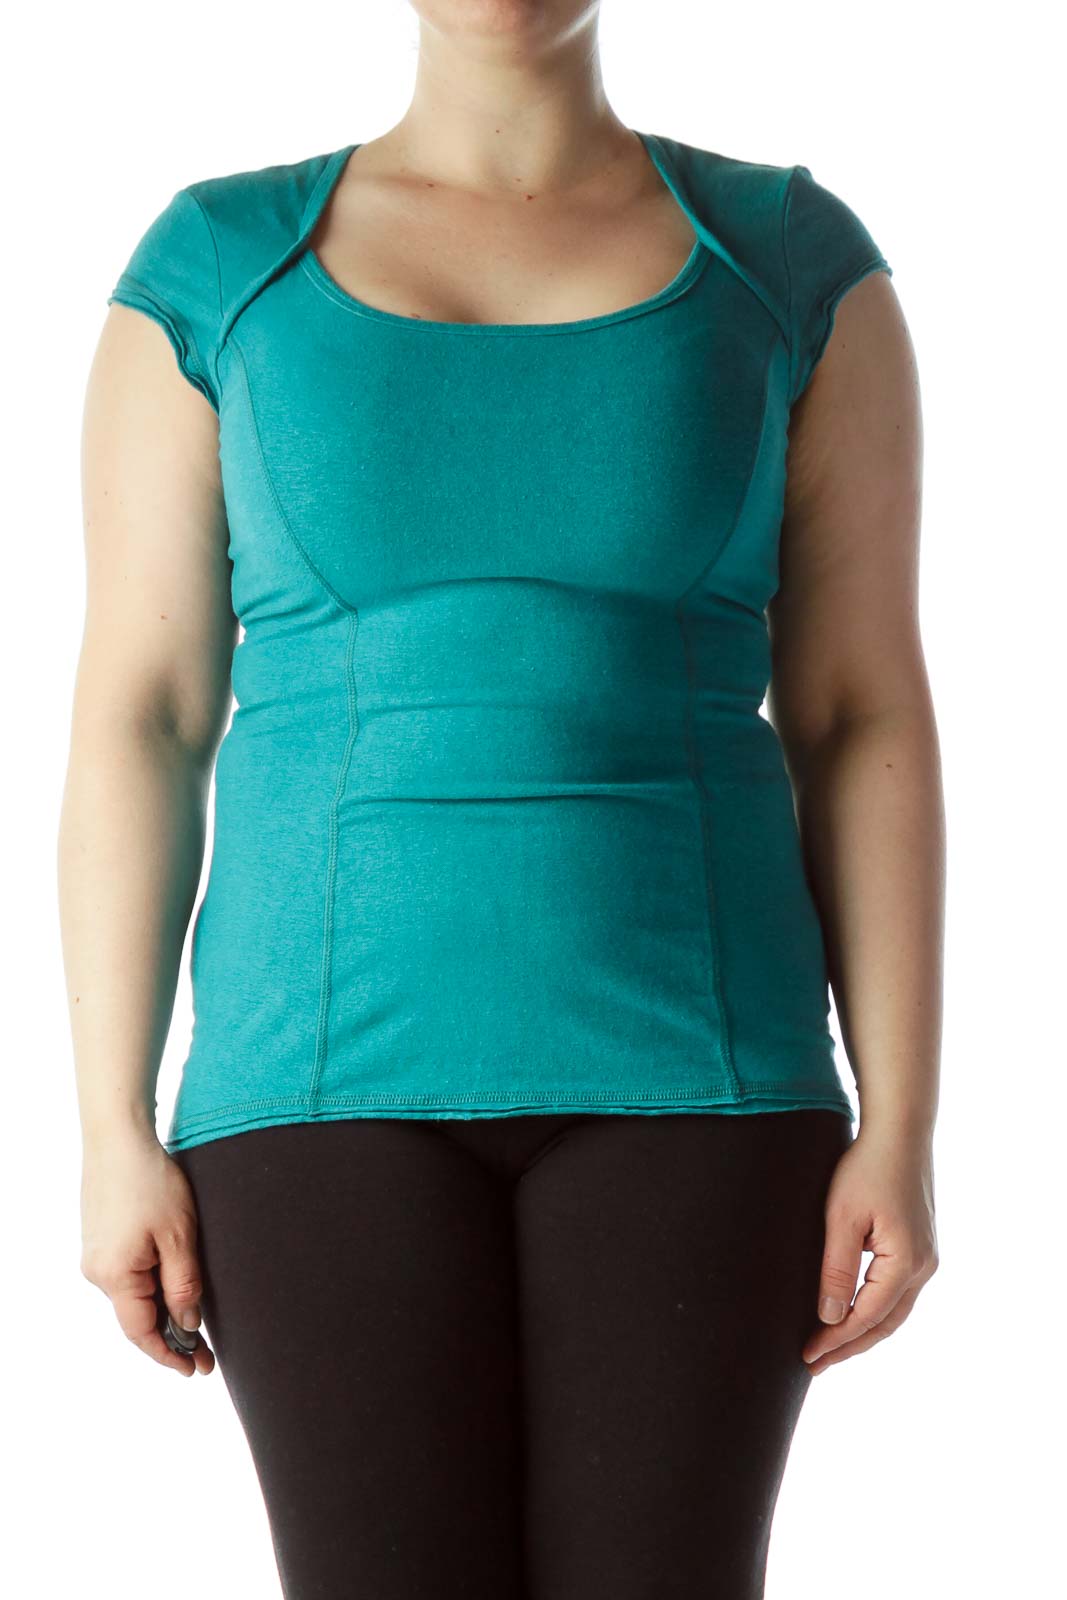 Teal Blue Short Sleeve Back Cut-Out Sports Top Front